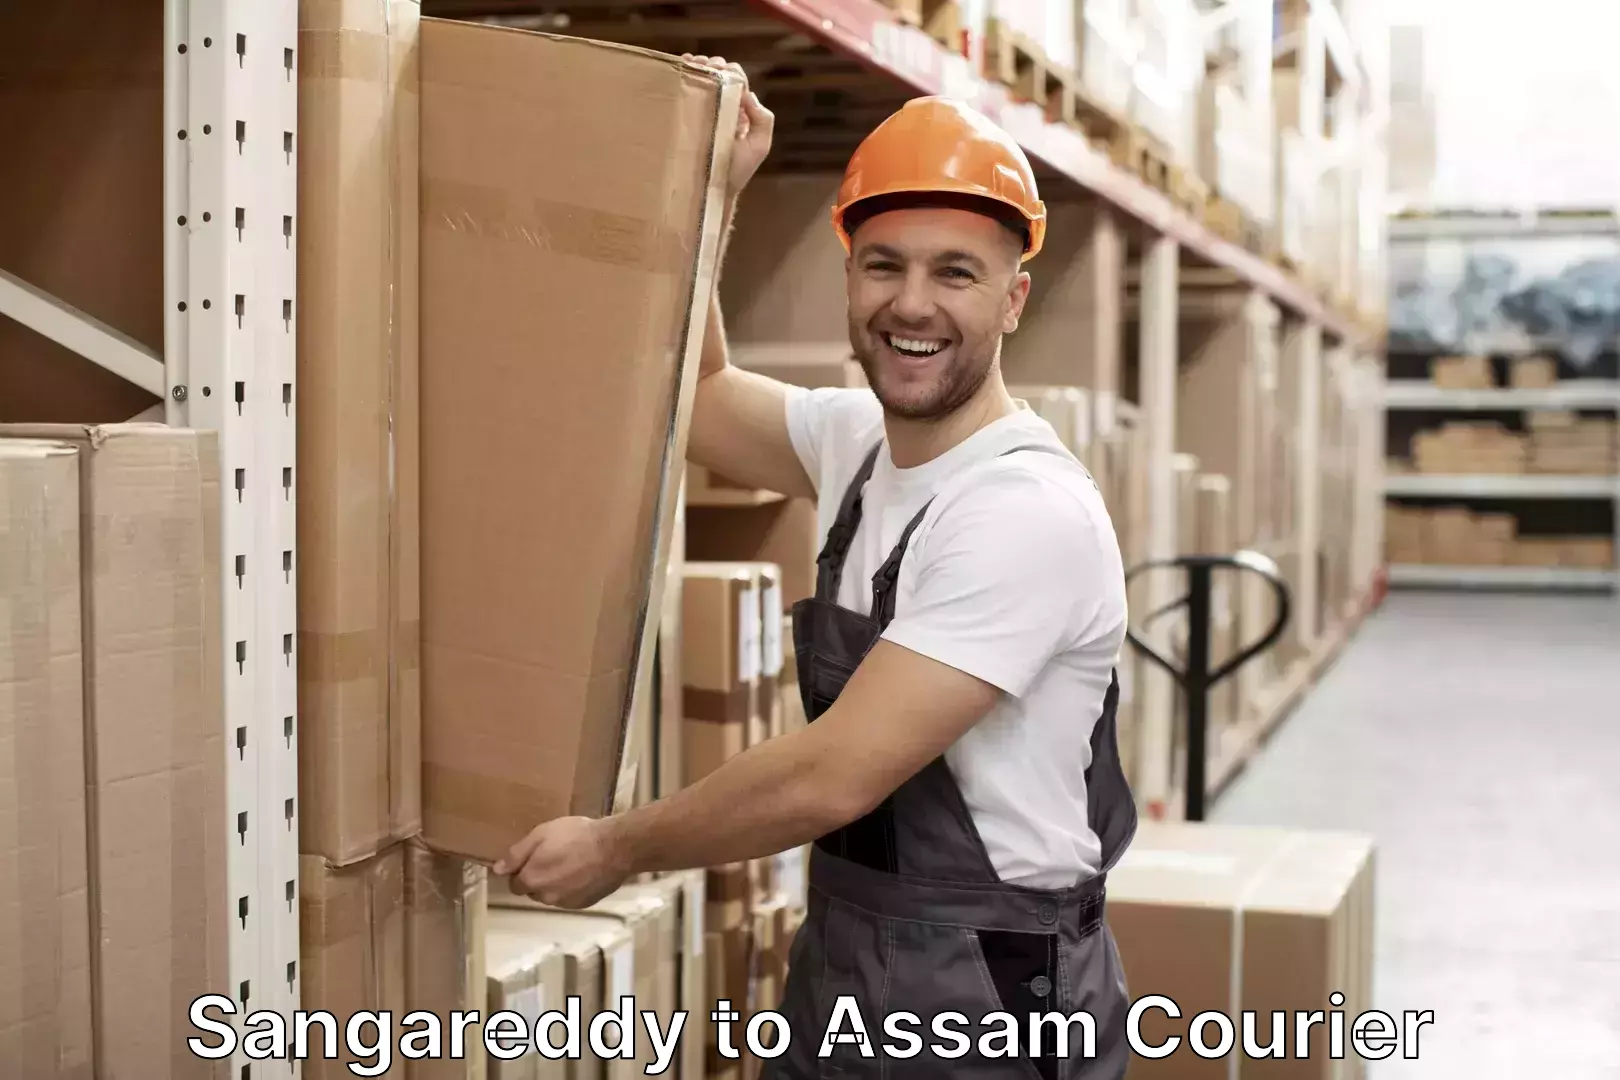 Luggage transport consultancy Sangareddy to Lala Assam